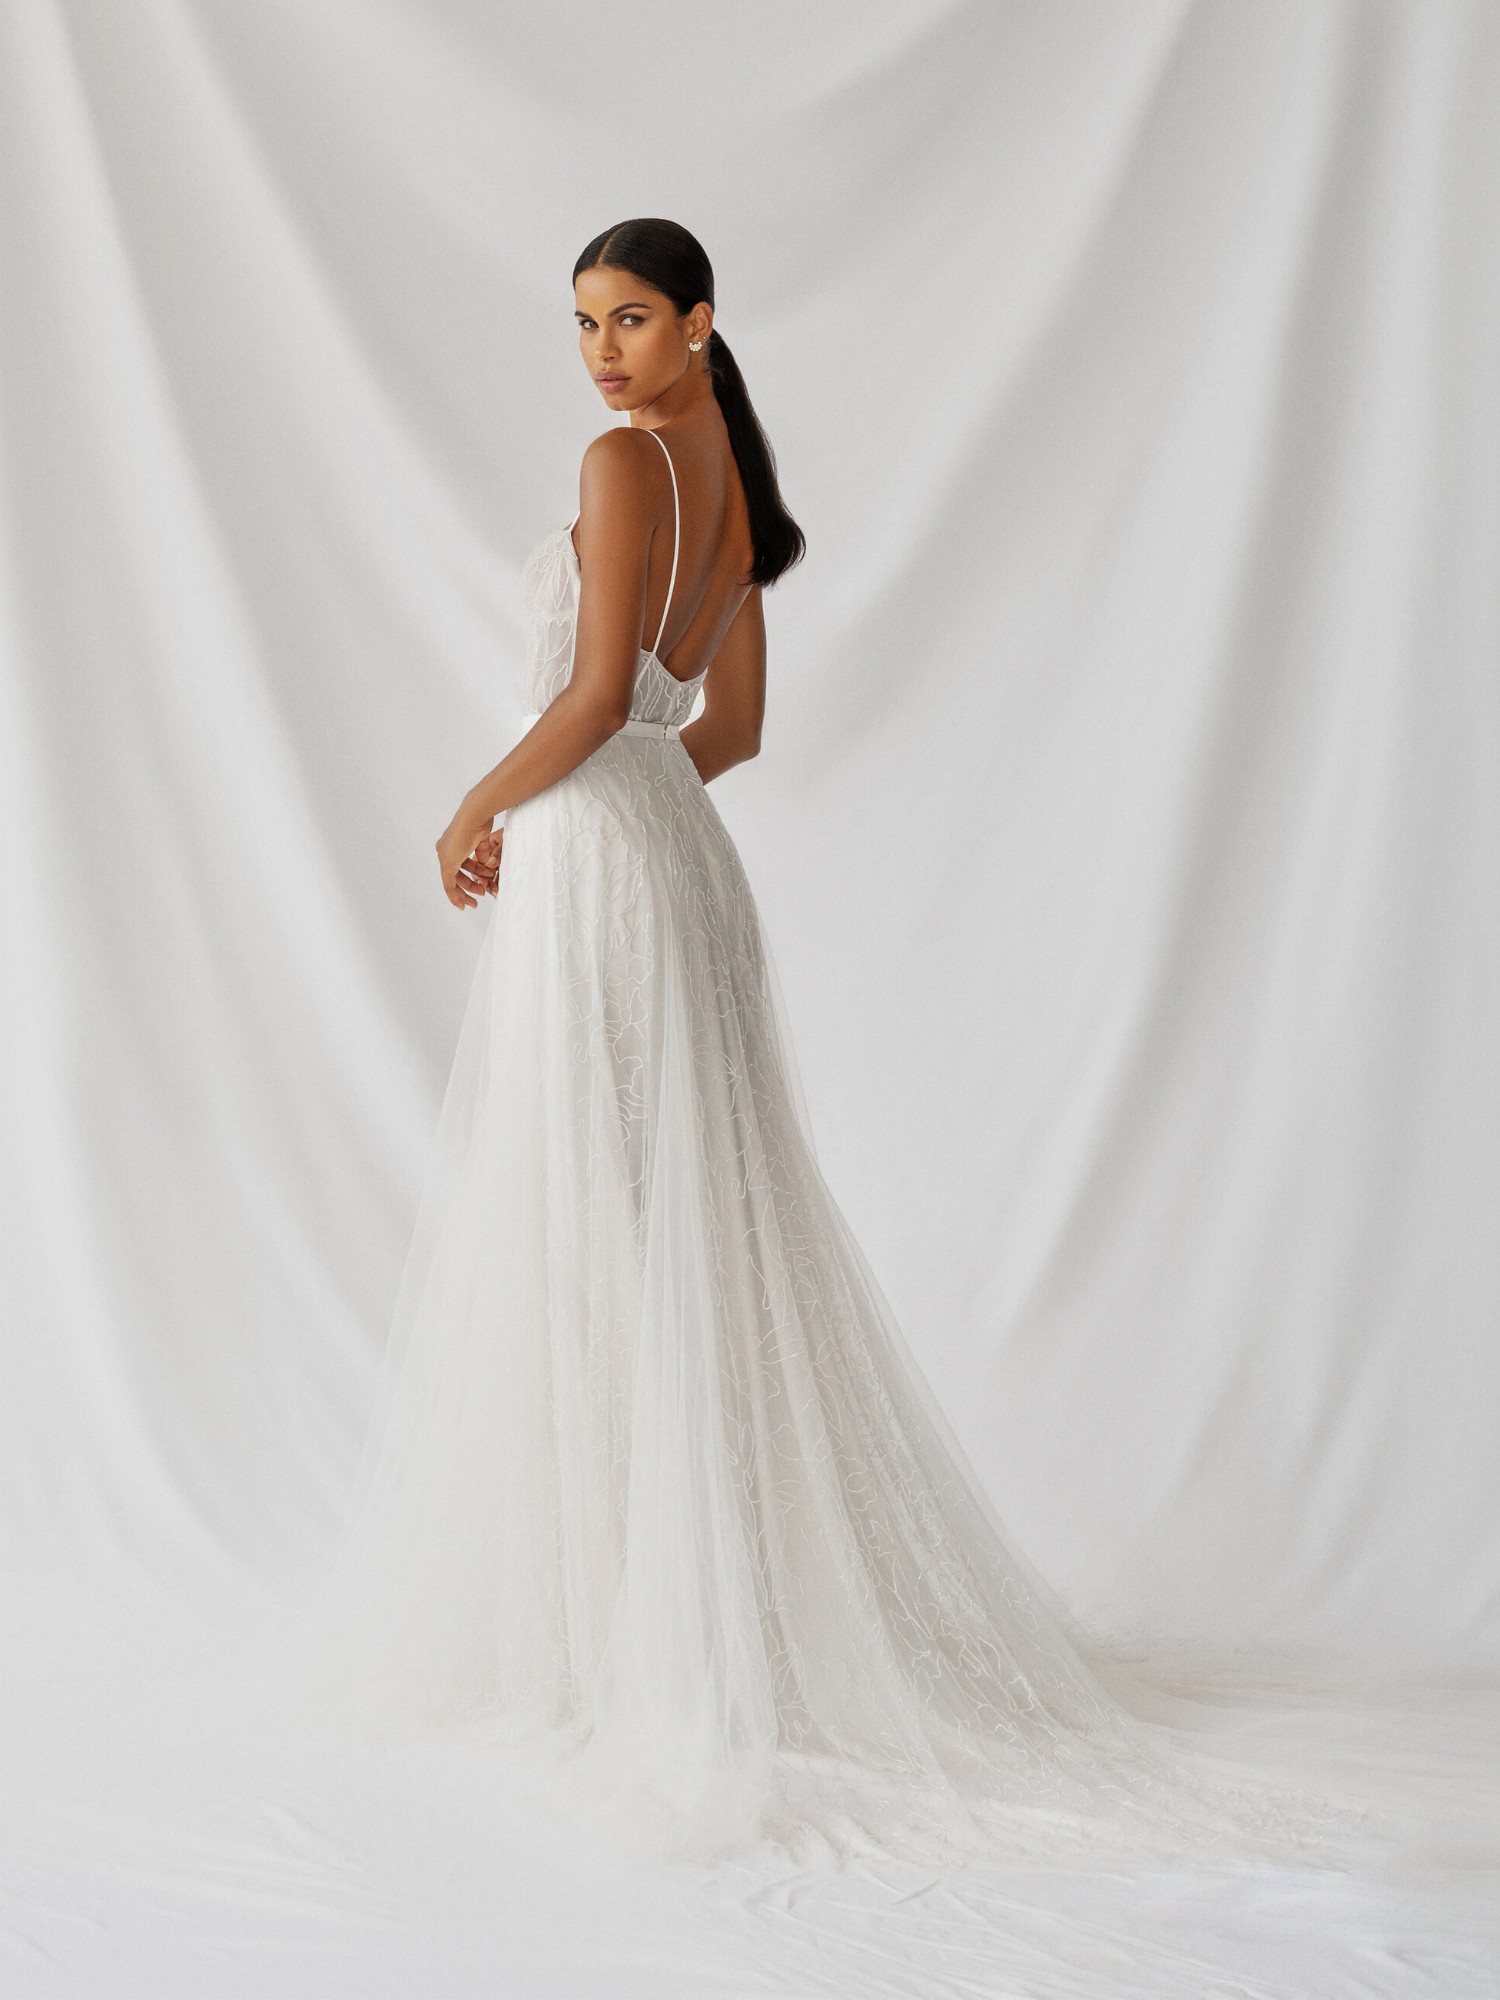 Amaryllis Gown Inspirated By Botanica of Alexandra Grecco 2021 Bridal Collection